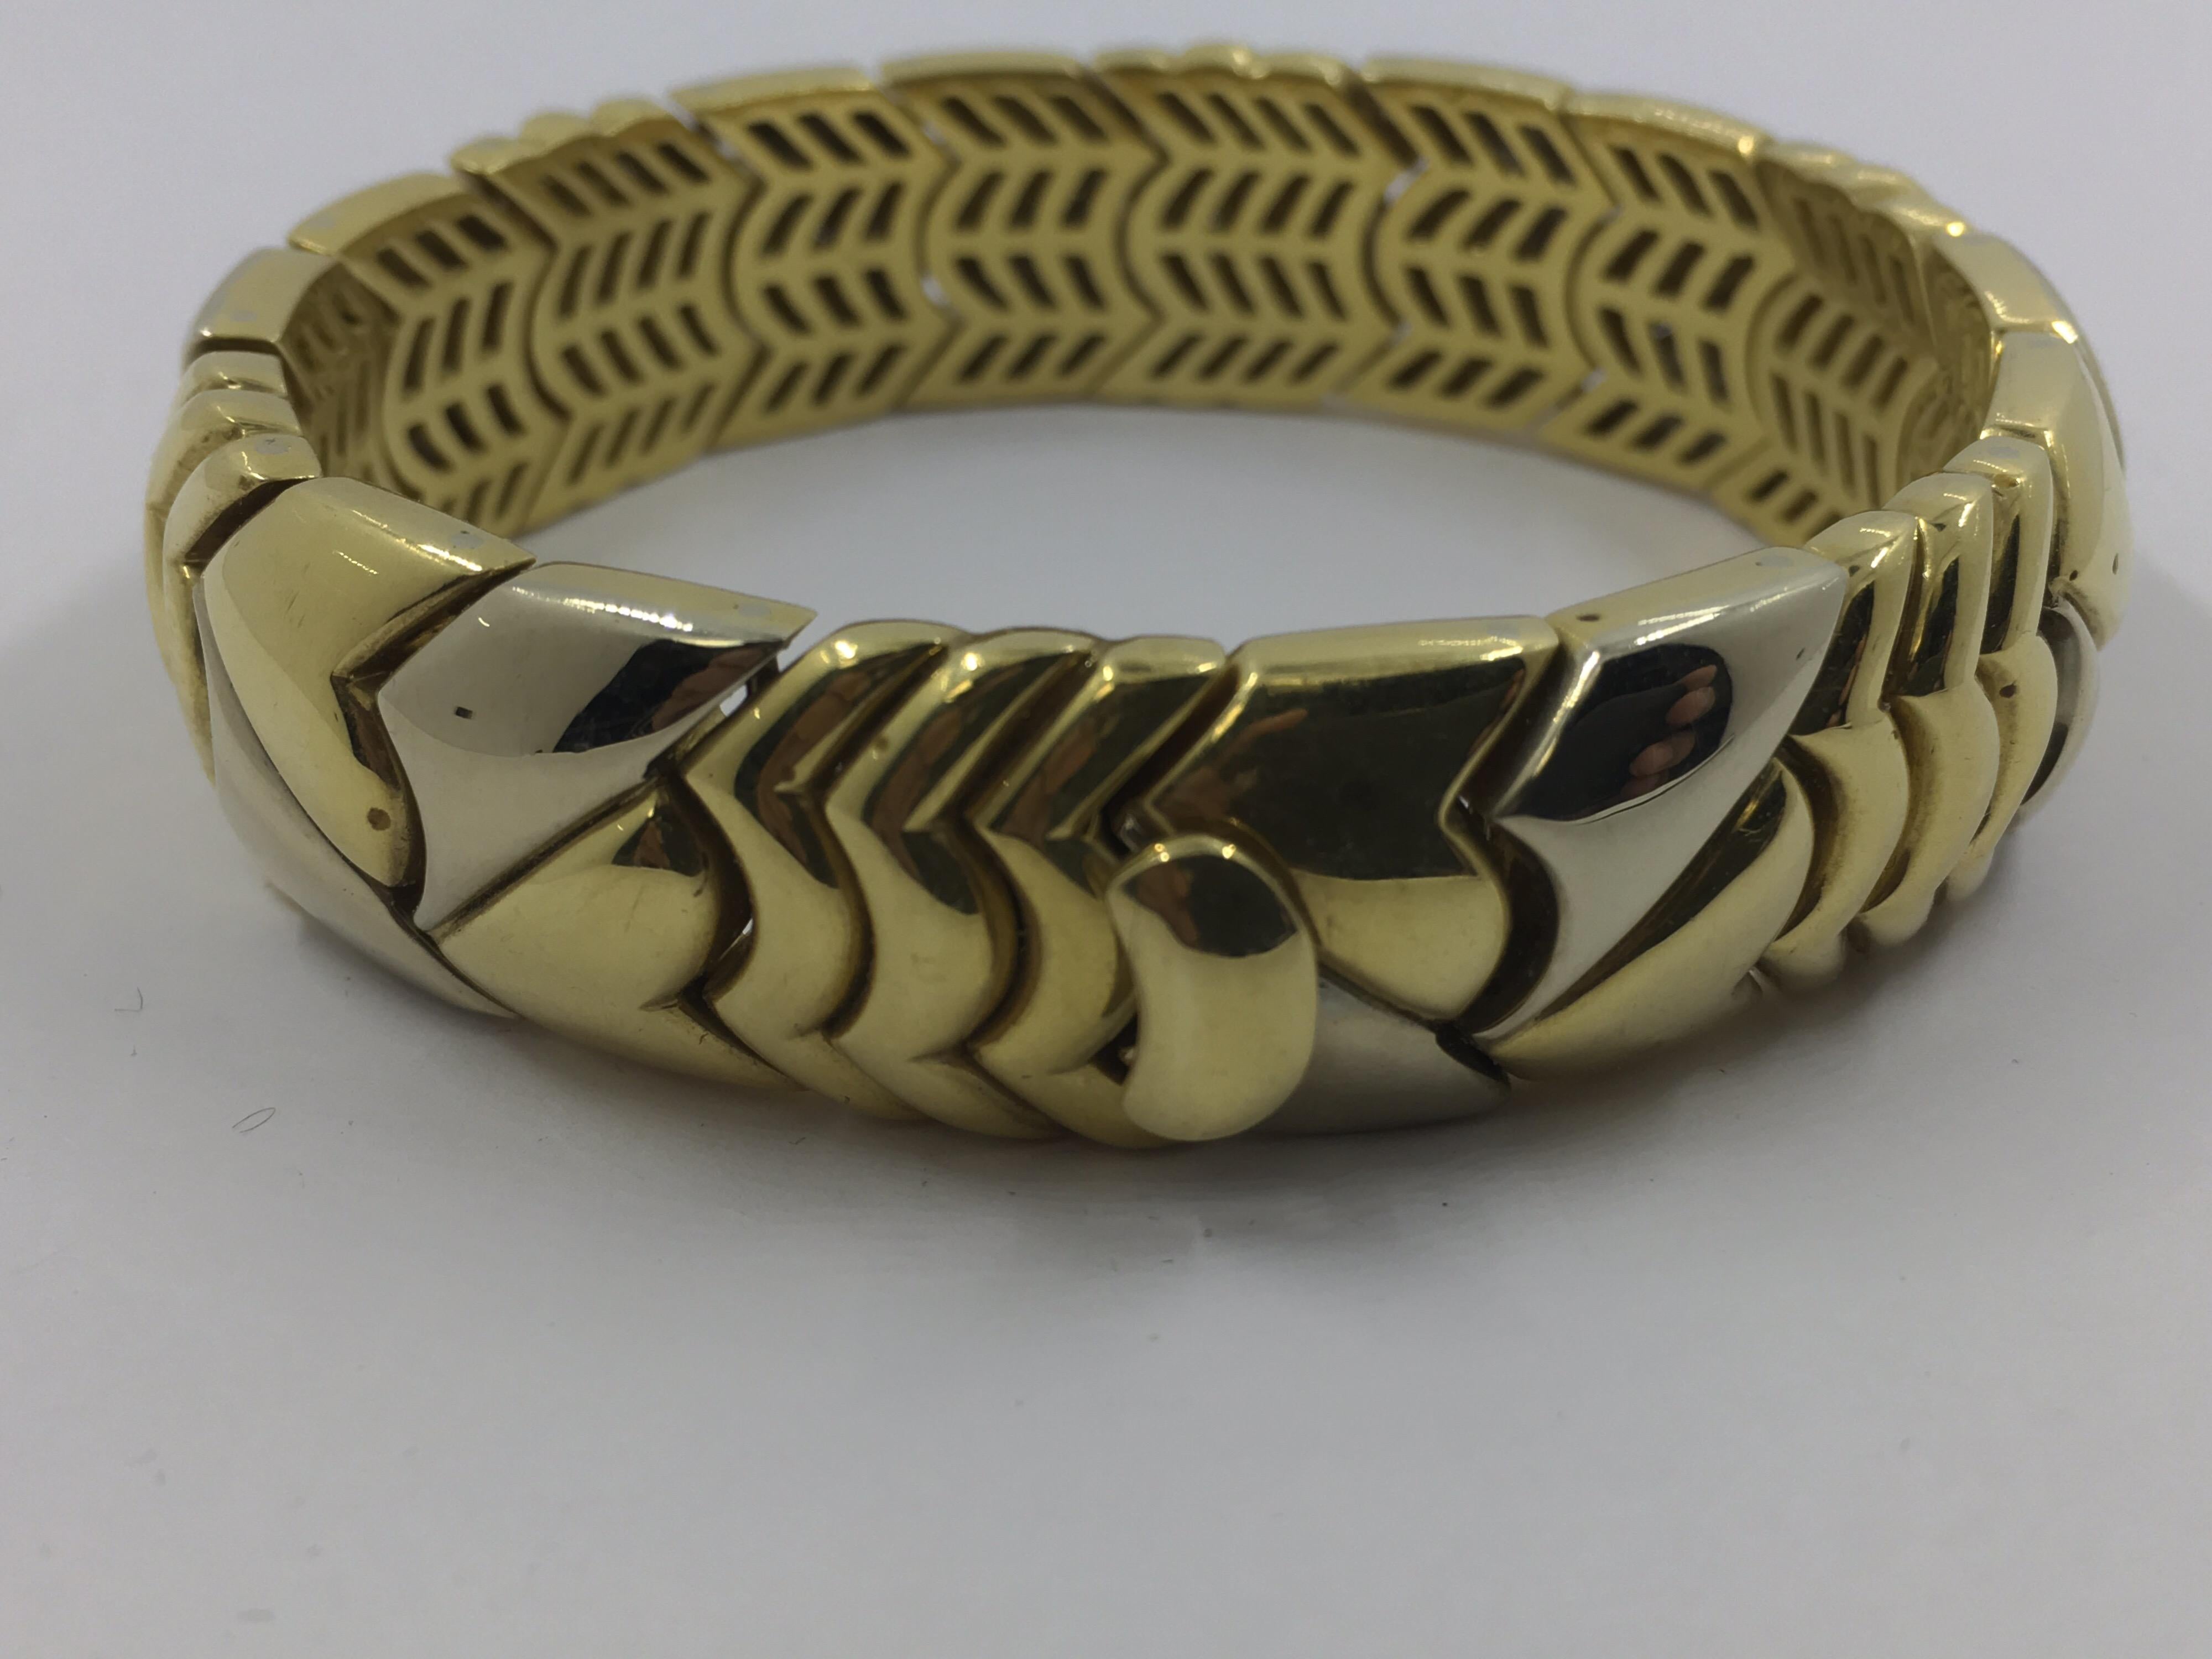 18 Kt White and Yellow Gold Bracelet
made in Italy
